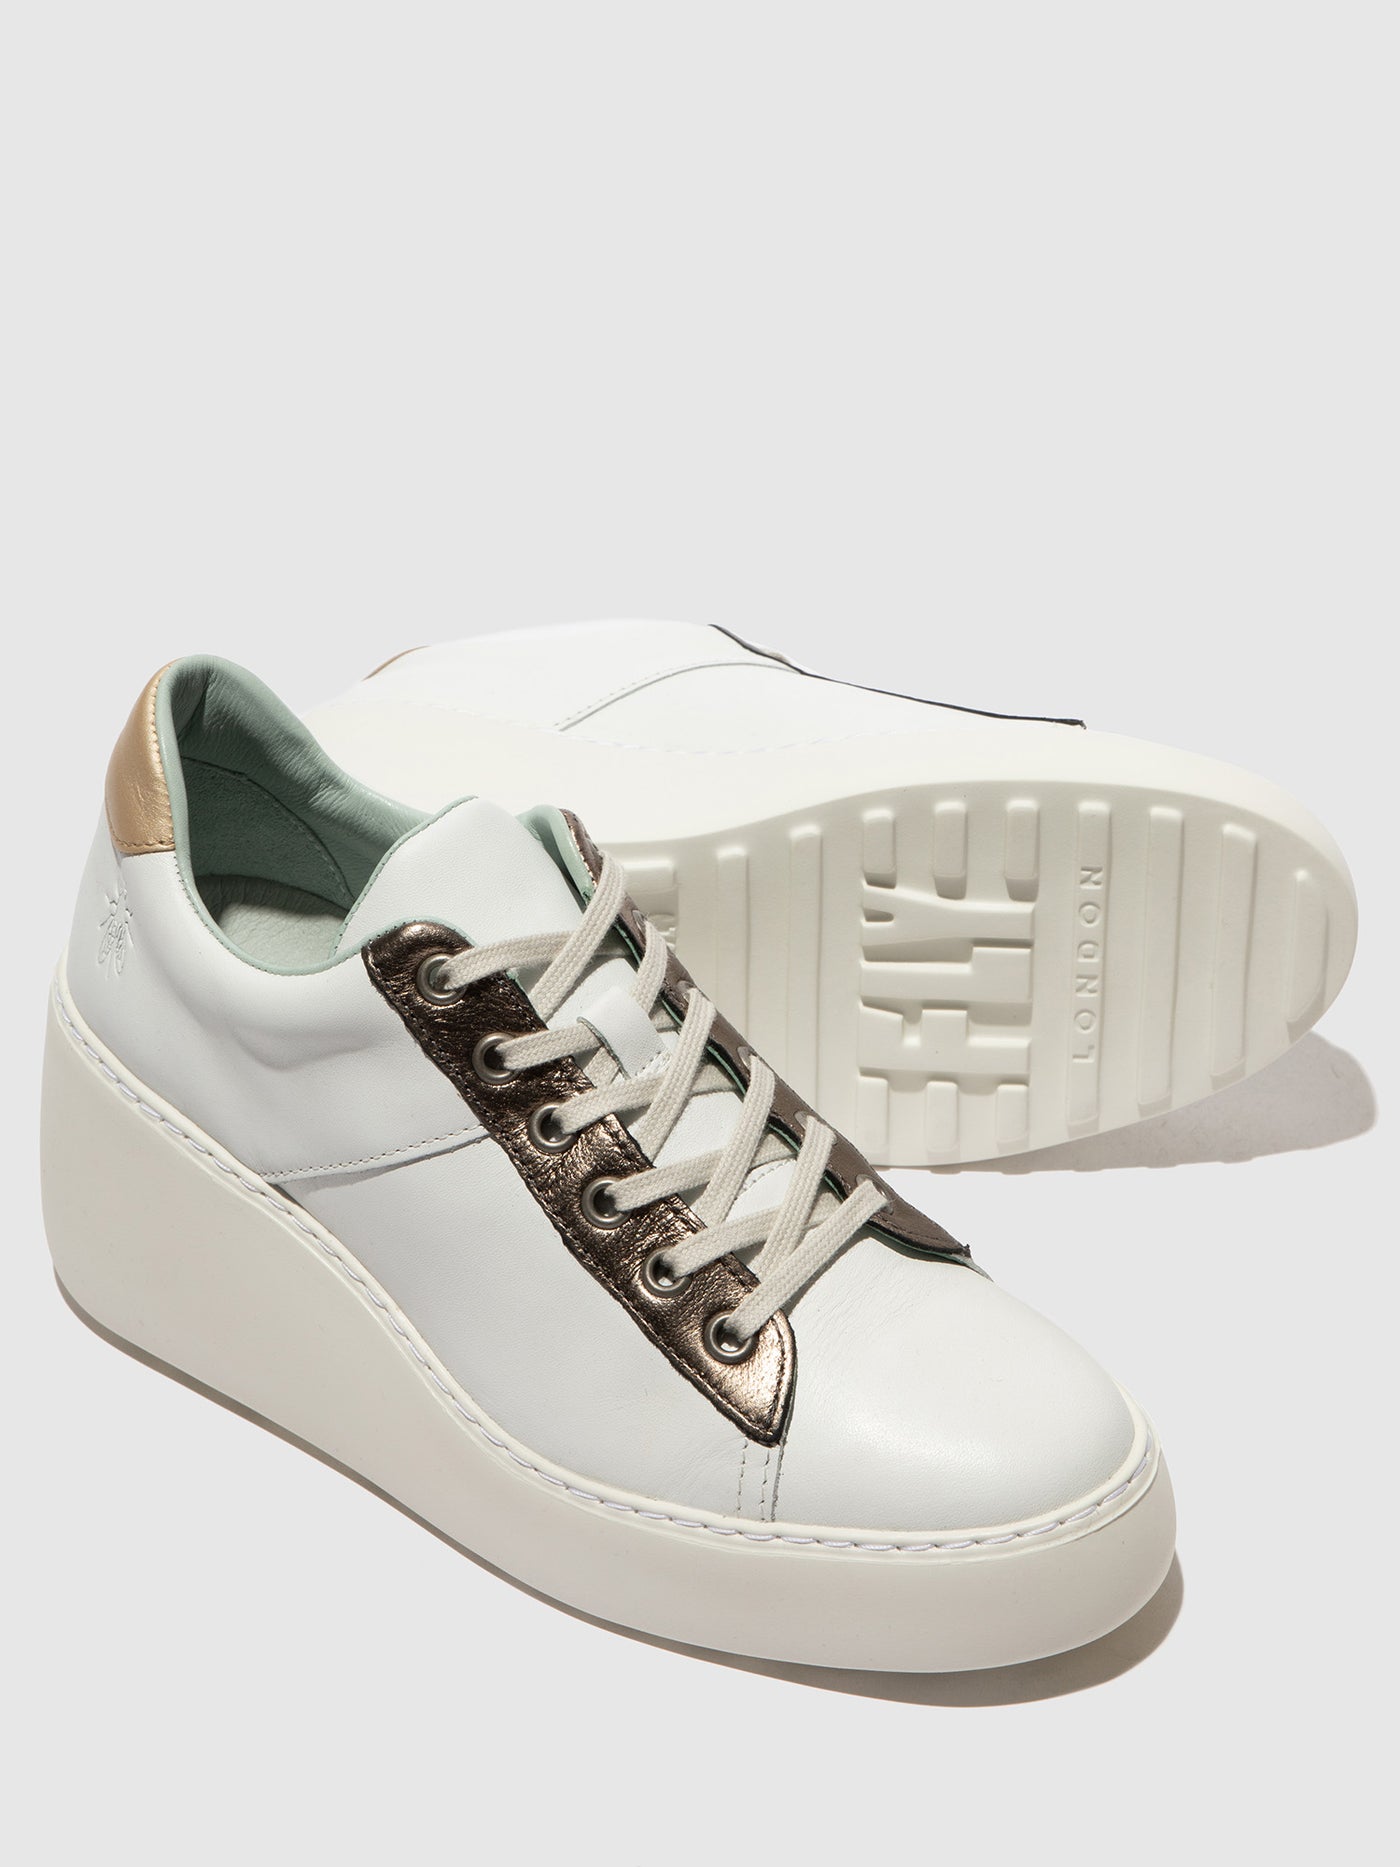 Lace-up Trainers DELF580FLY WHITE/BRONZE GRAPHITE/GOLD